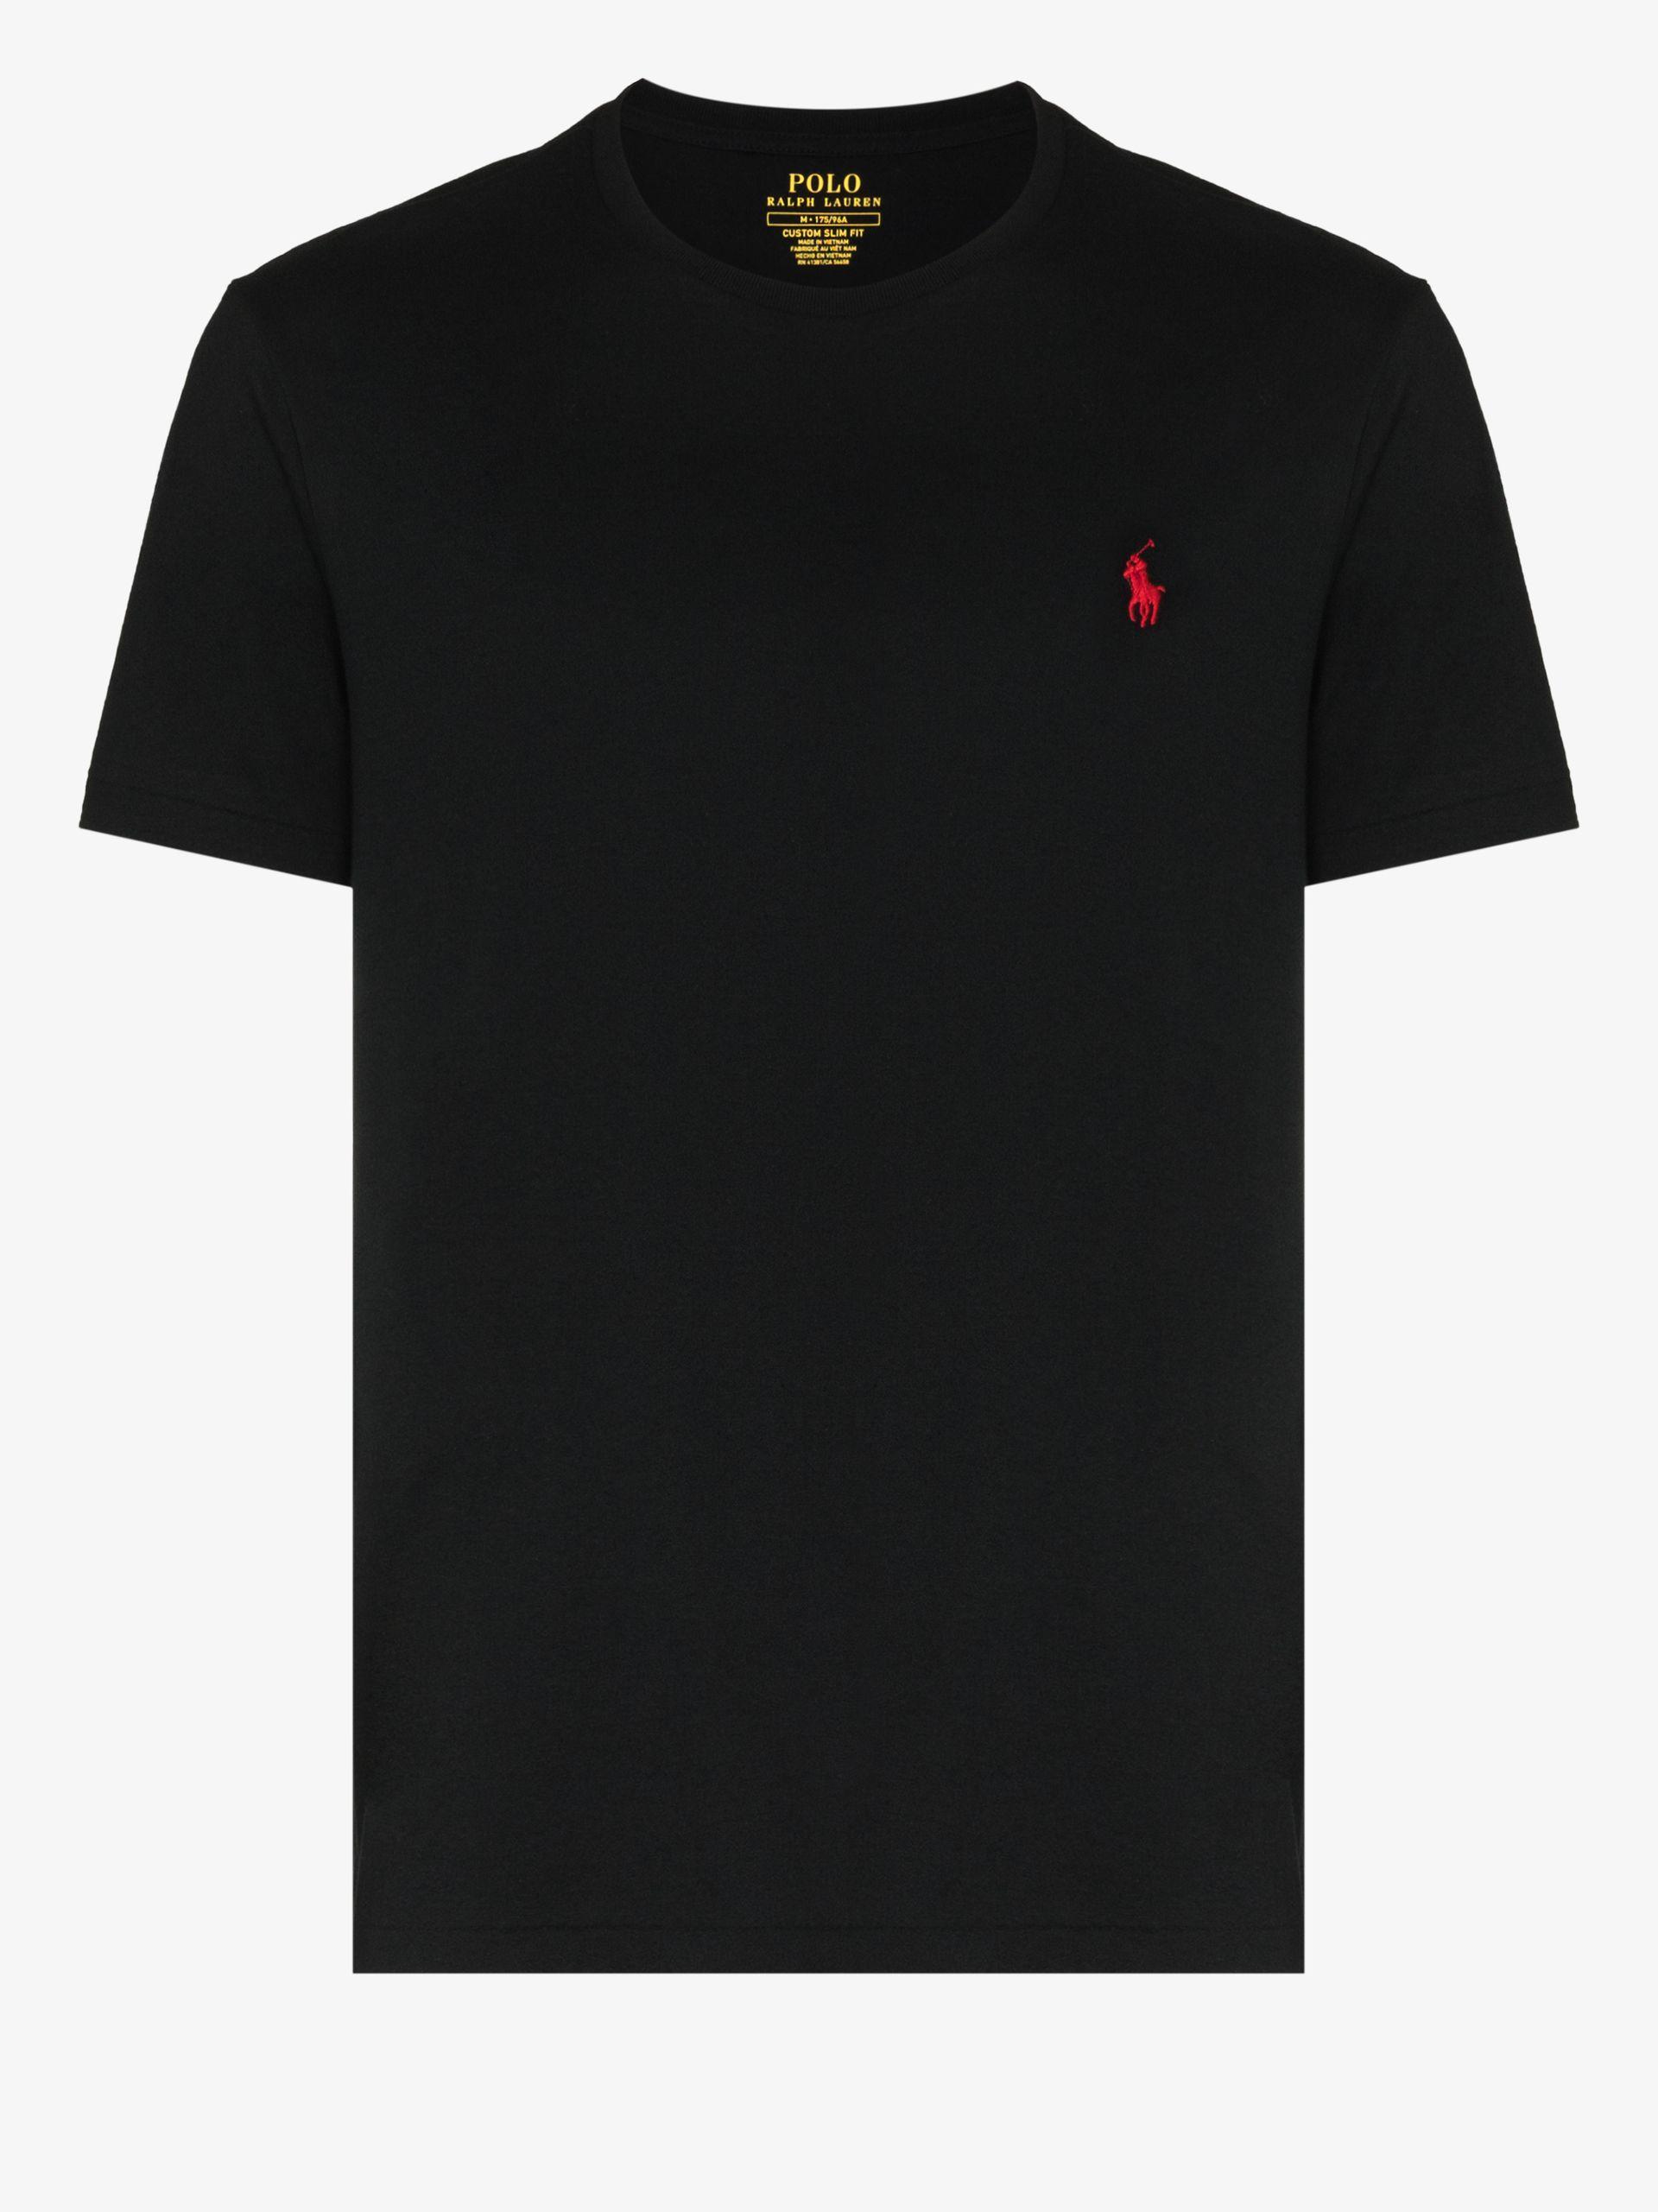 Polo Ralph Lauren Embroidered Logo Cotton T-shirt in Black for Men | Lyst